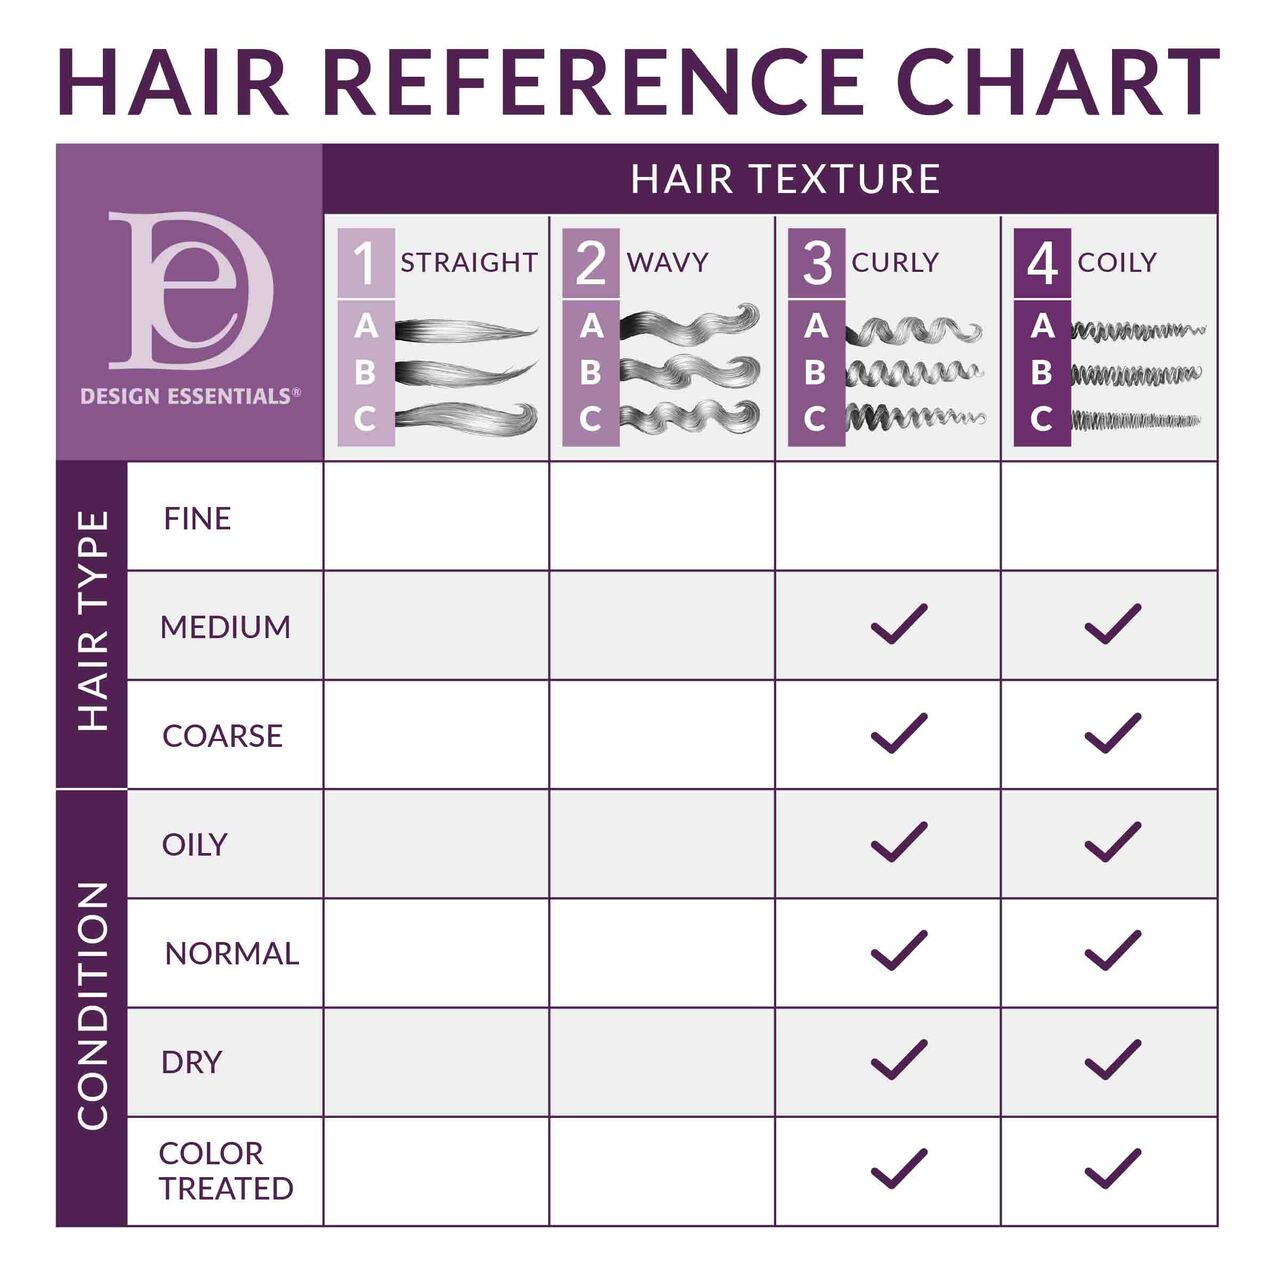 AA_Defining_Creme_Gel_-_Hair_Reference_Chart__49181.1590454282